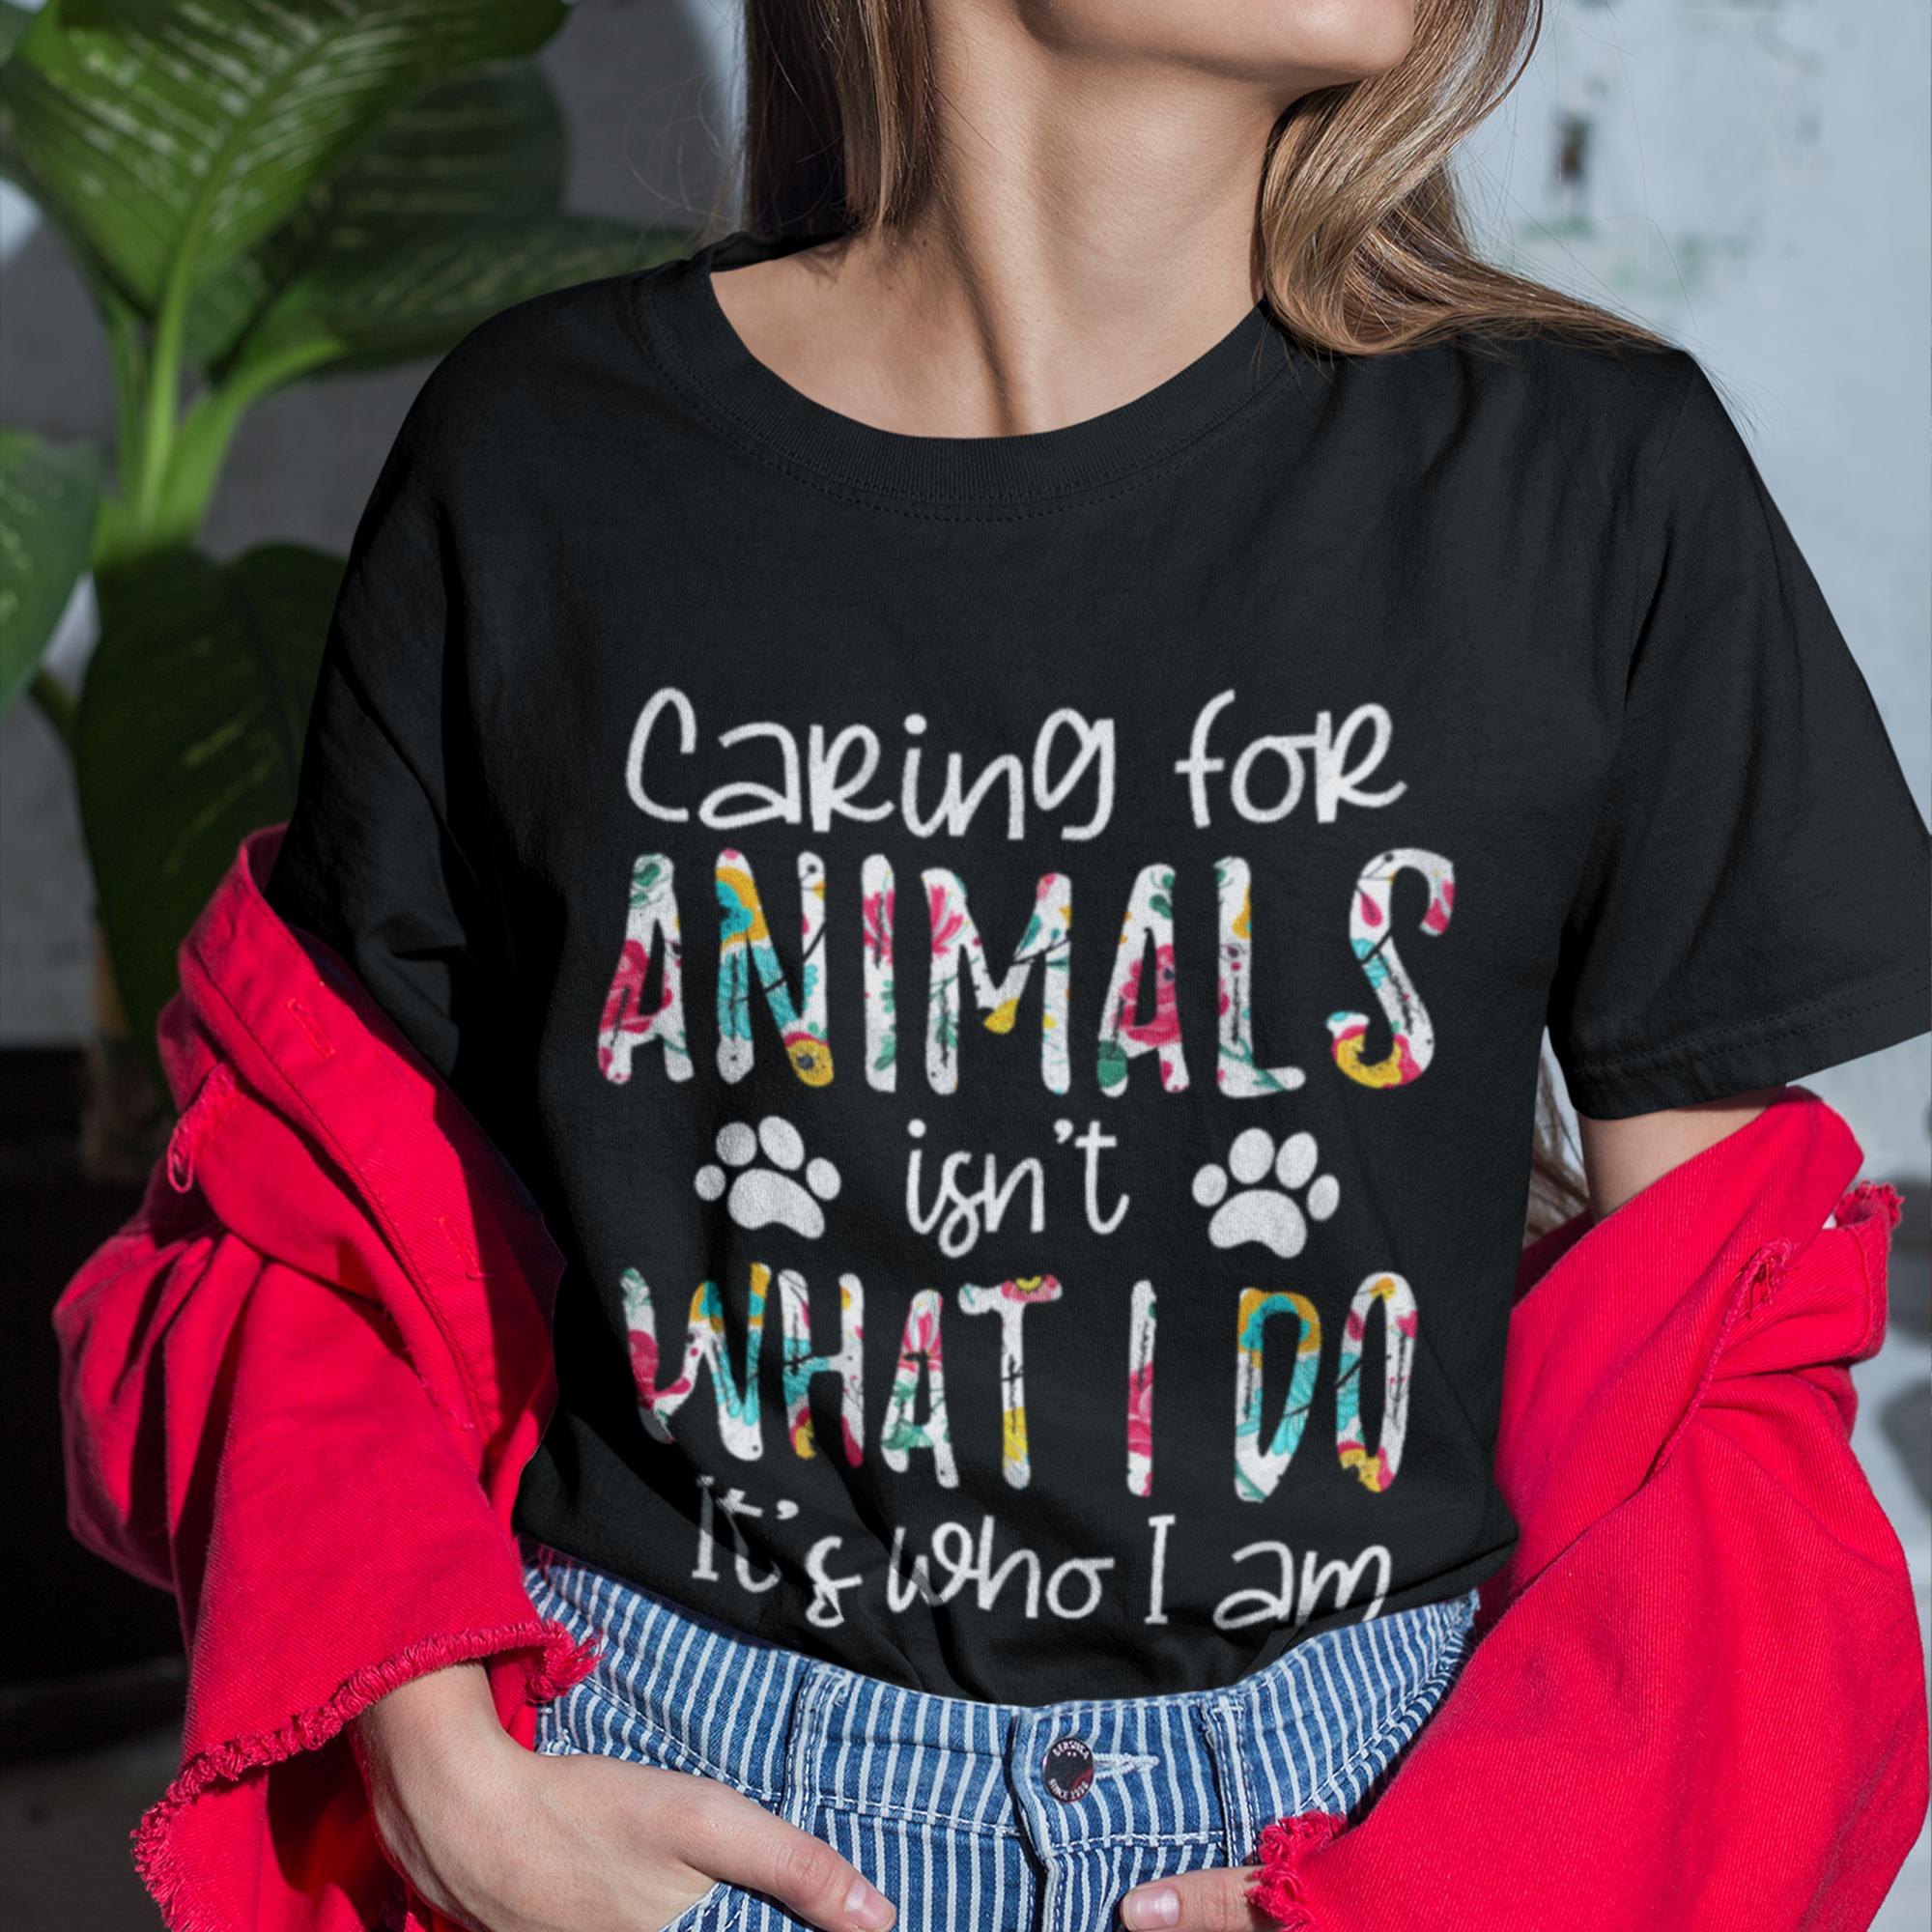 Caring for animals isn't what i do t-shirt, Animal lover shirt, animal lover gift, dog mom gift, dog lover shirt, animal lovers shirt